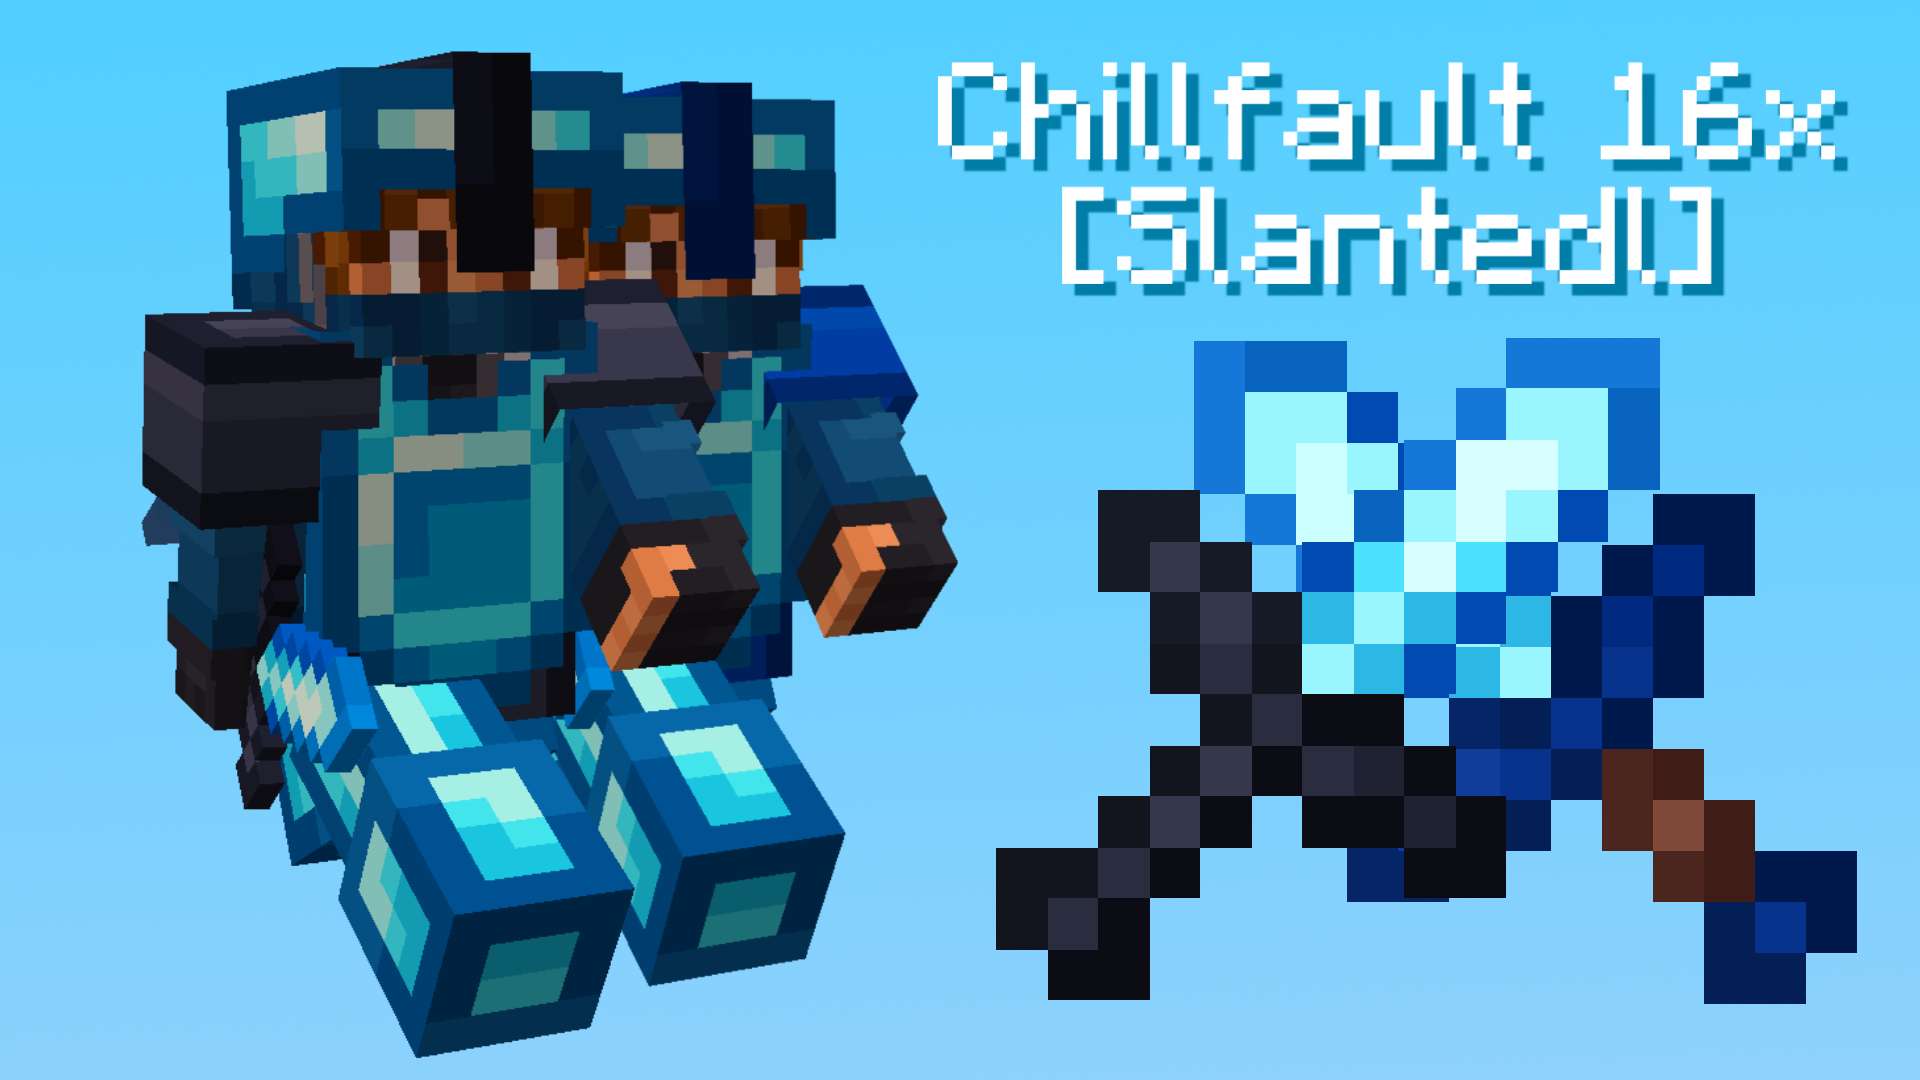 Chillfault  [Slanted] 16x by Jes13 on PvPRP